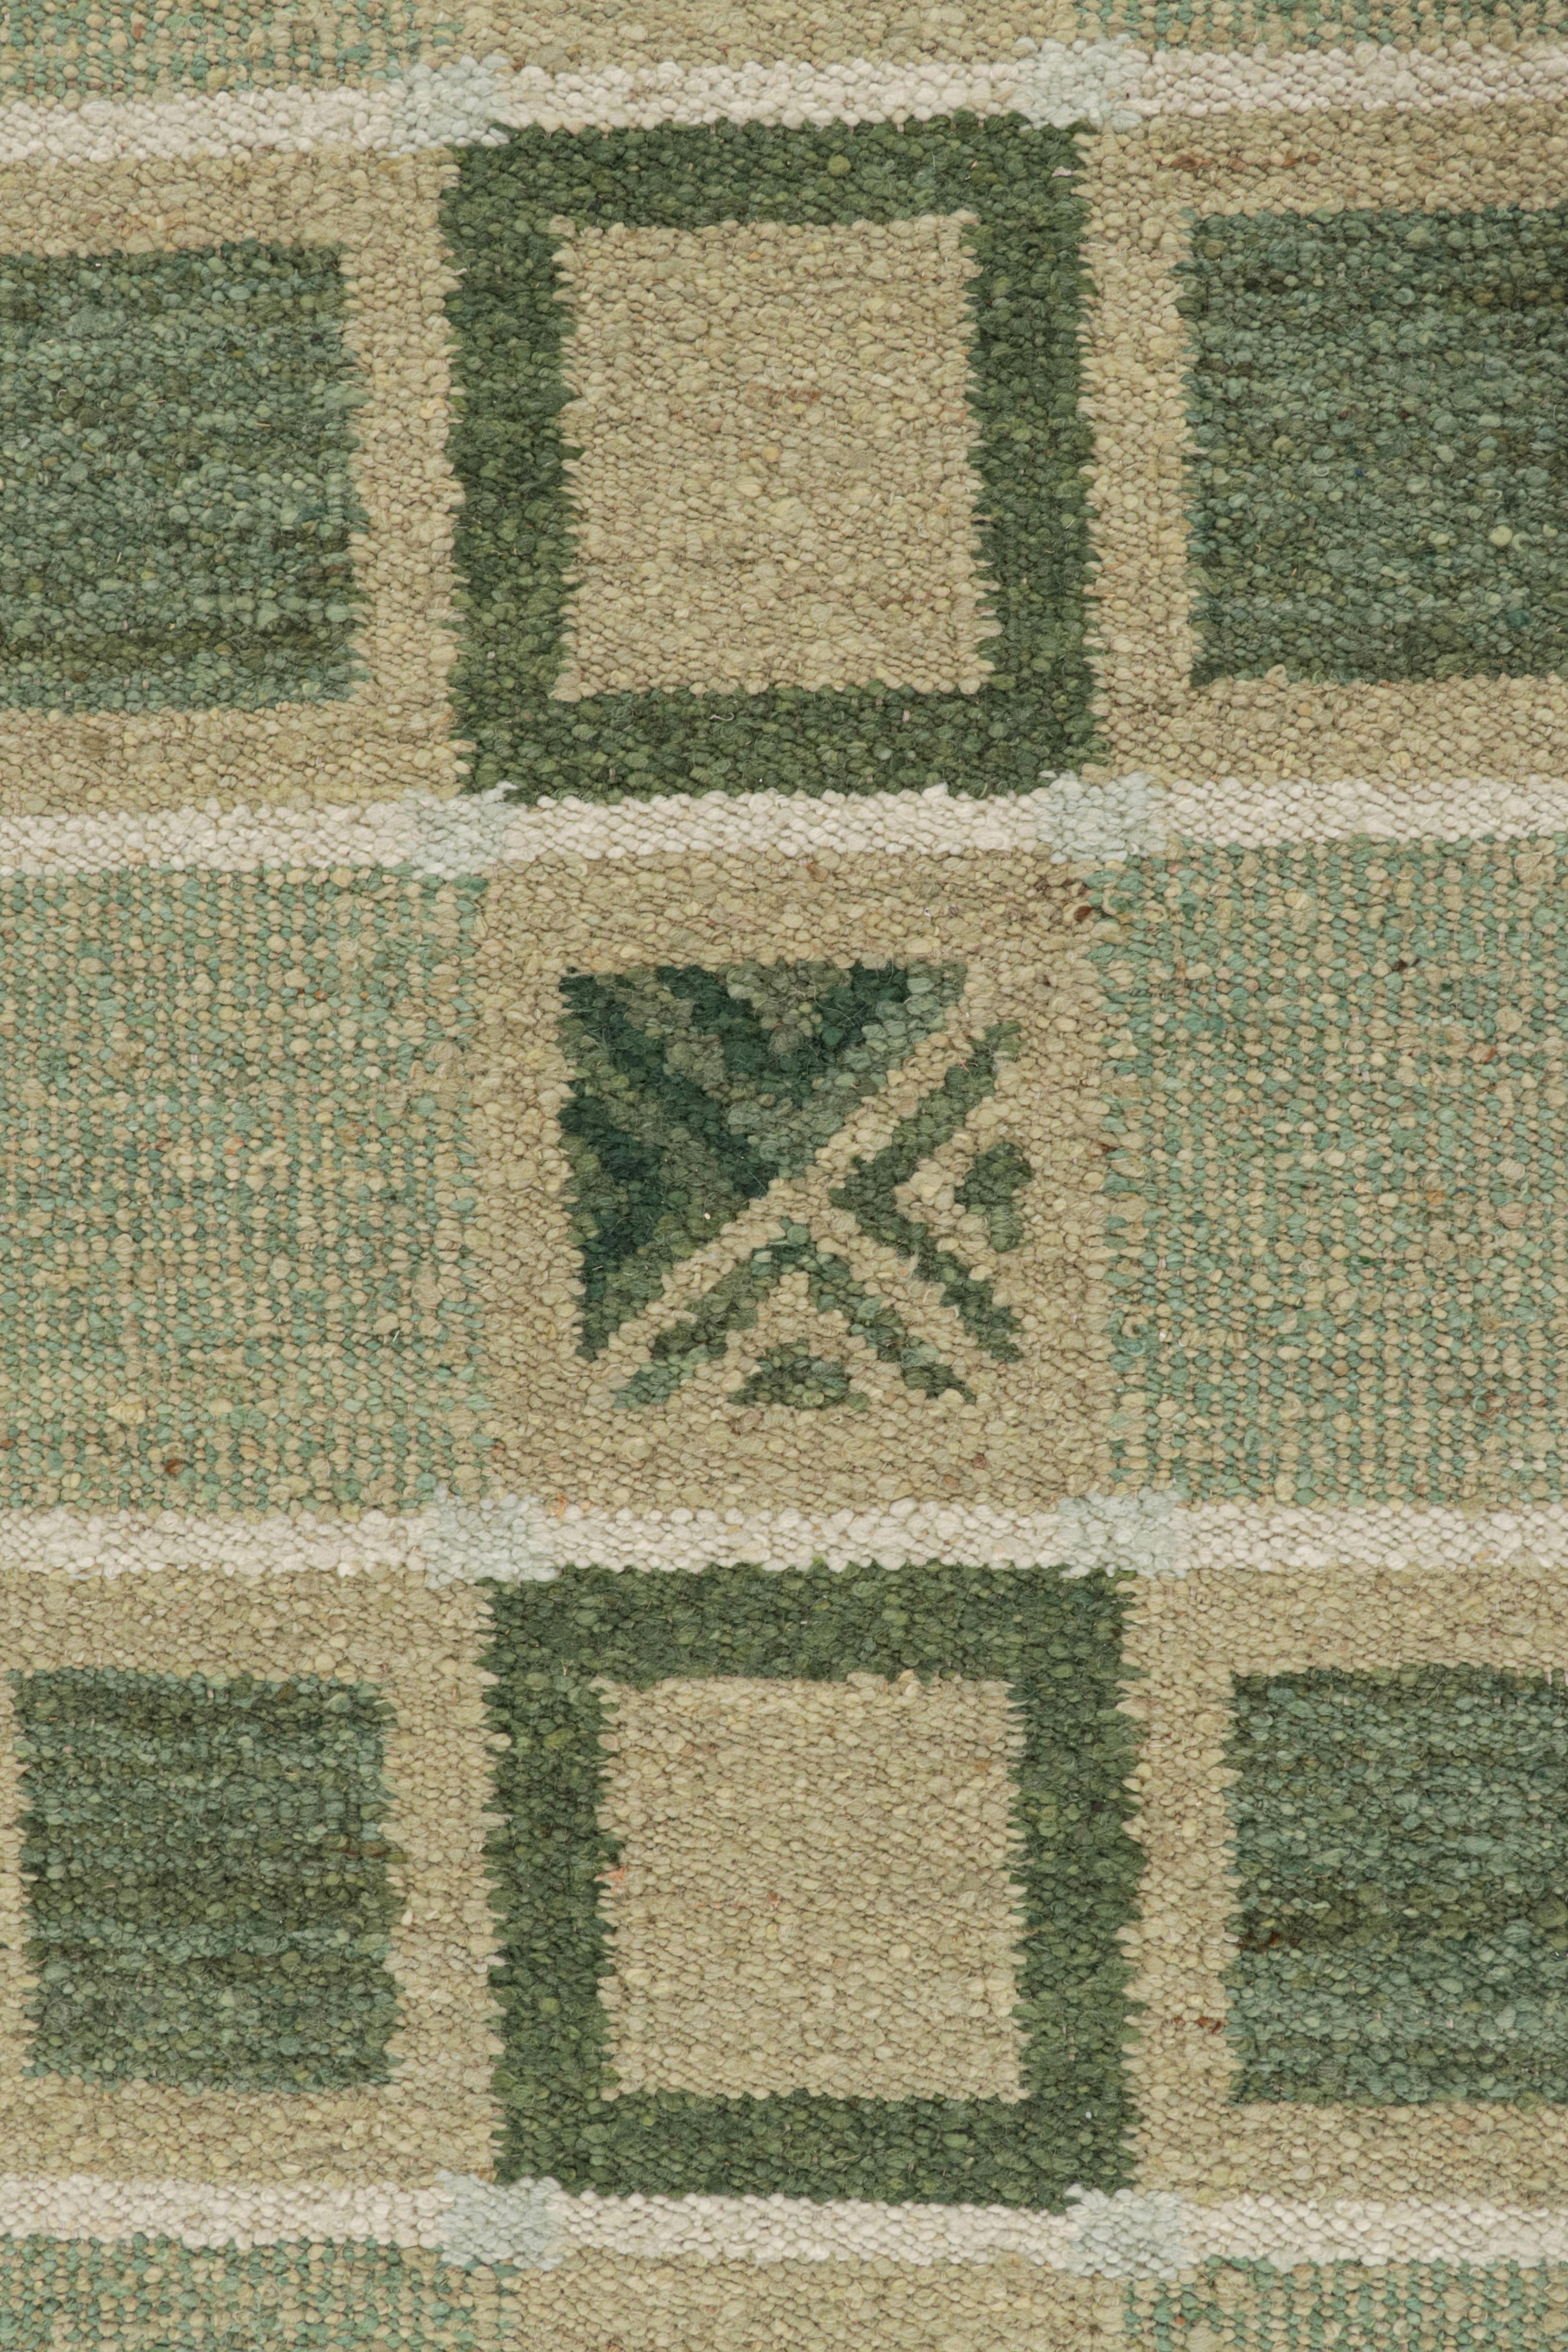 Modern Rug & Kilim’s Scandinavian Style Rug with Green, Beige-Brown Geometric Patterns For Sale